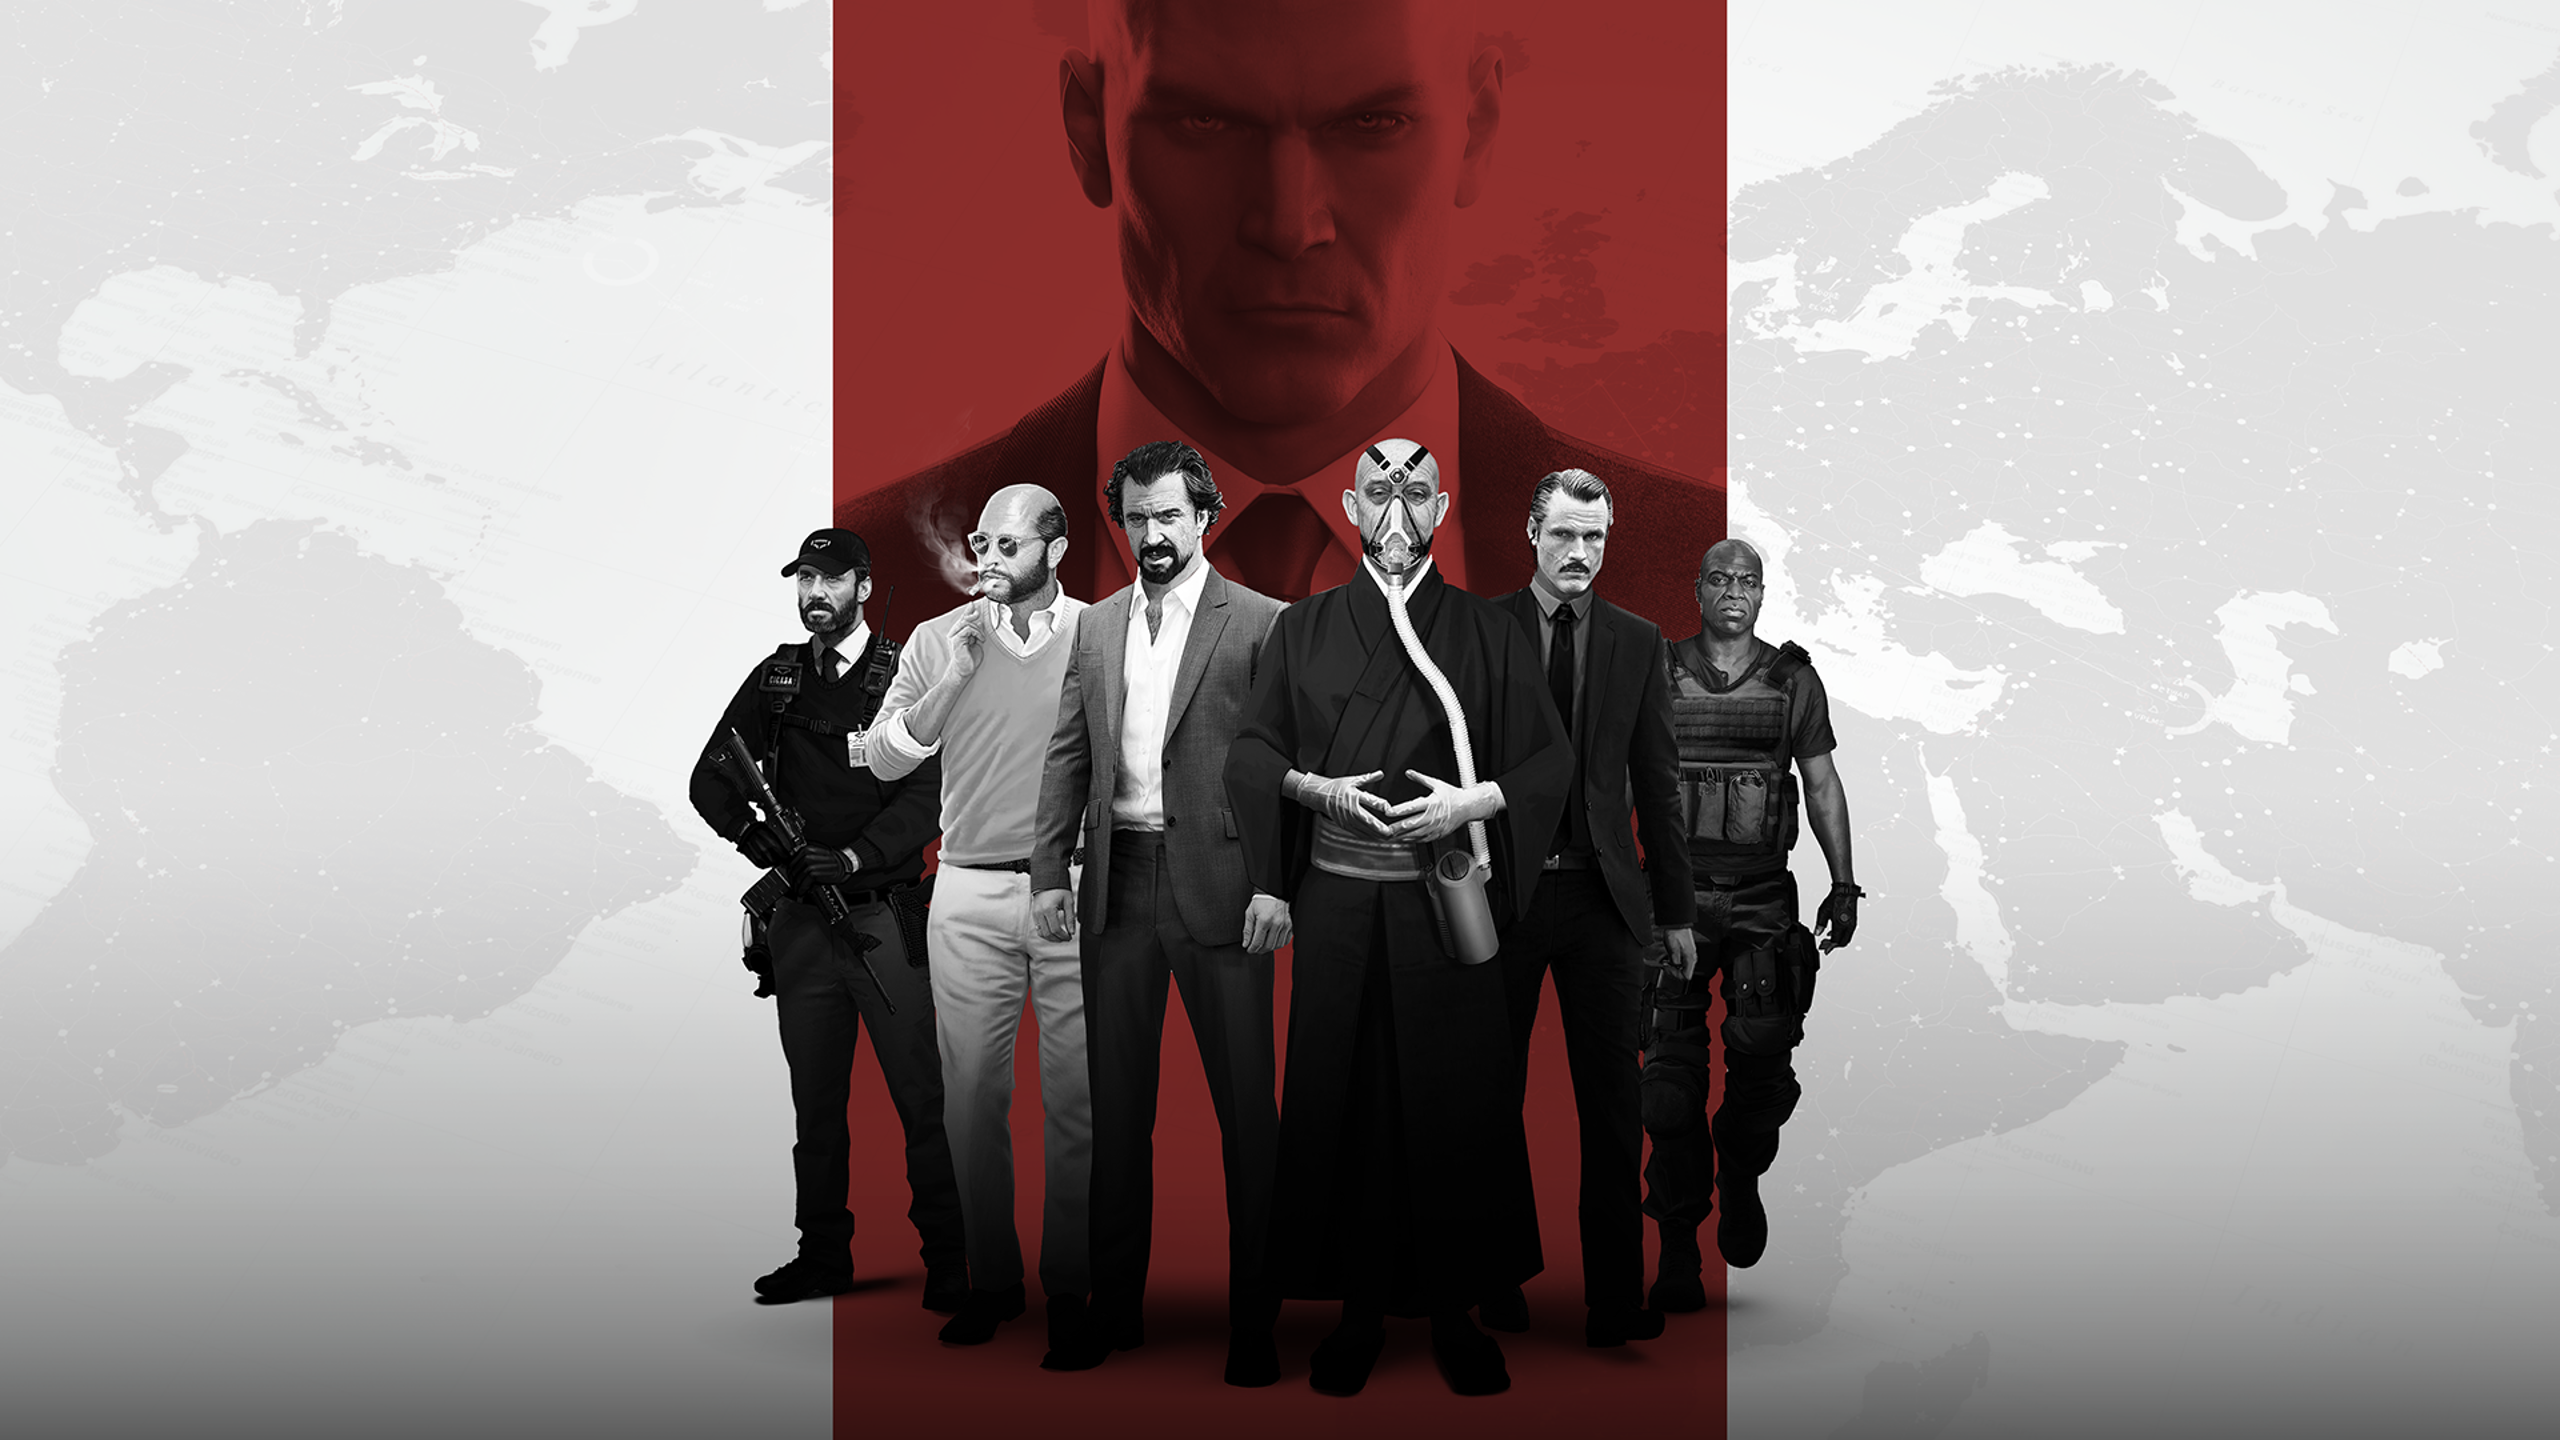 Hitman 3 for Xbox Series X: Release date, gameplay, trailers, and  everything you need to know